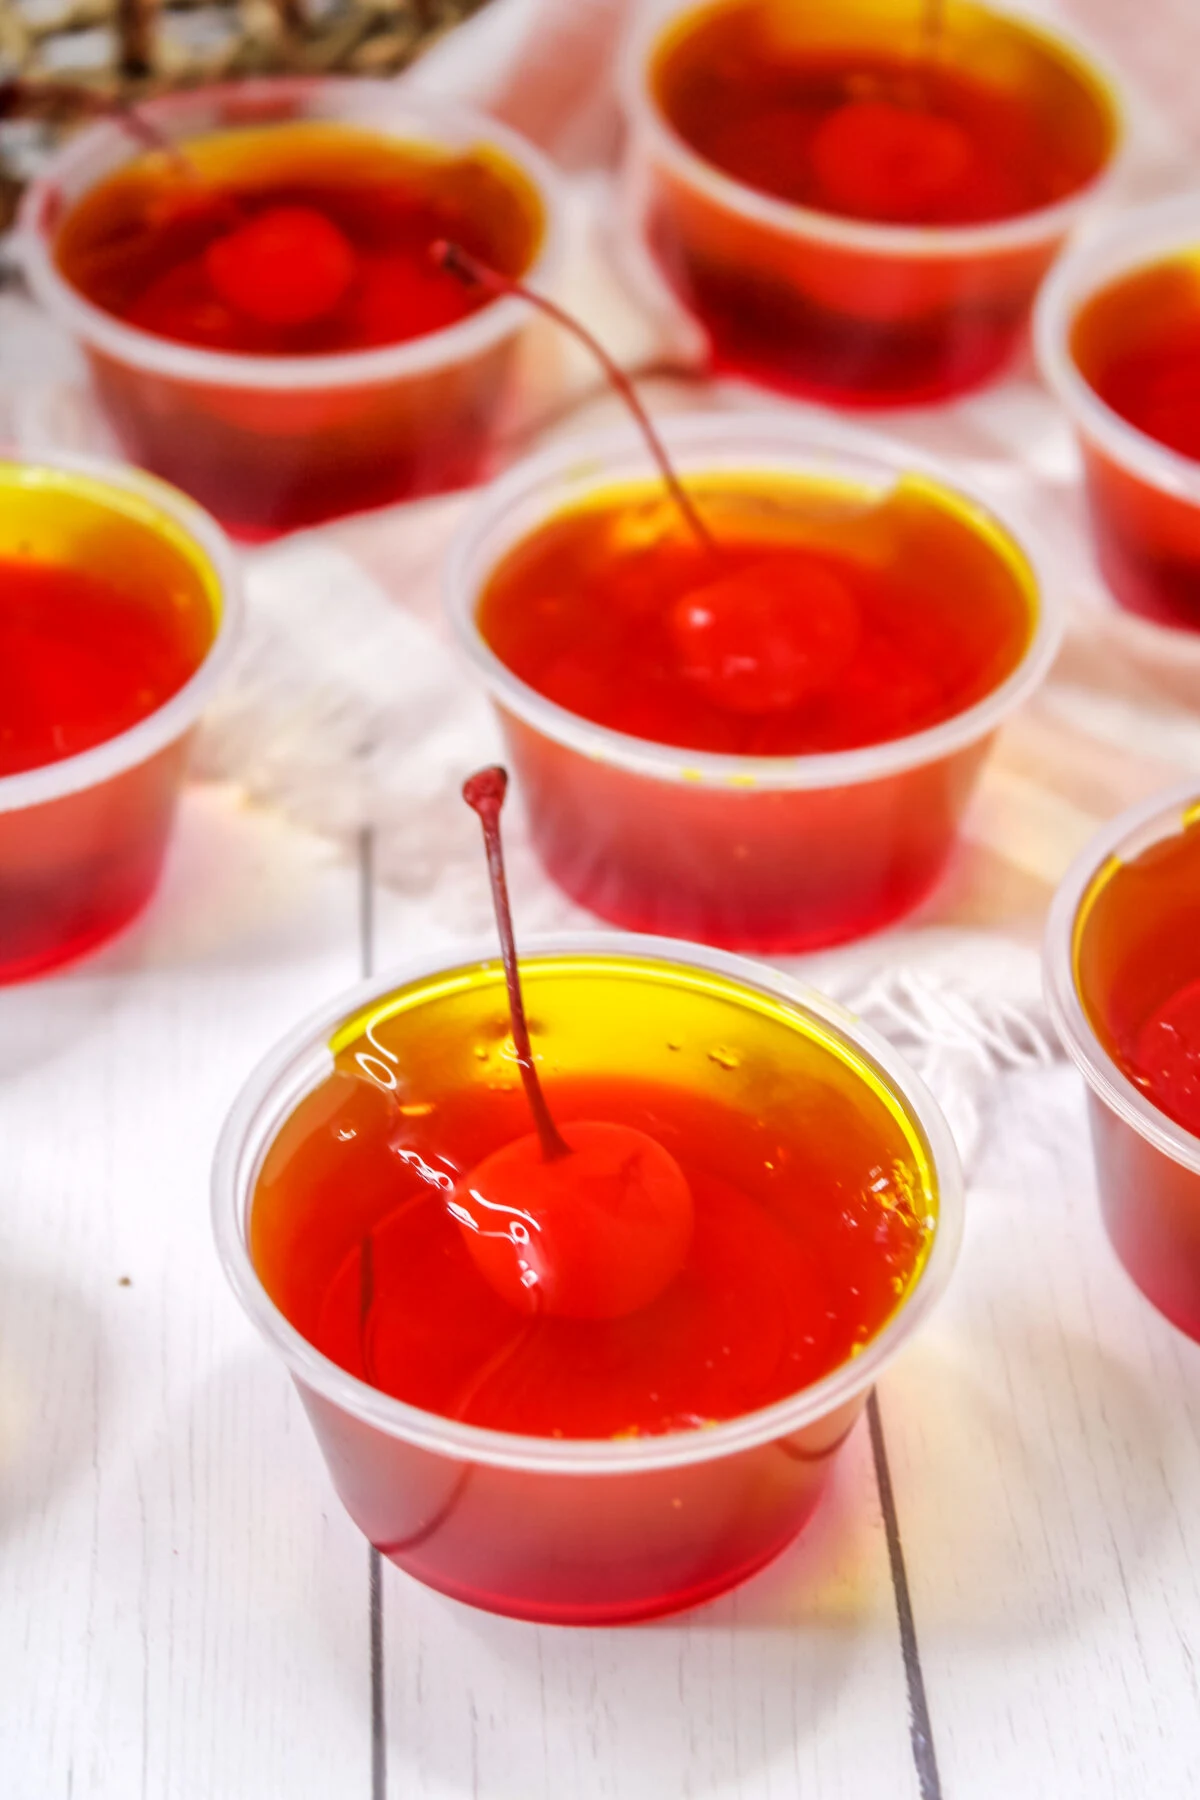 These pineapple upside down jello shots are a take on traditional pineapple upside down cakes. They're perfect for any party or get together!